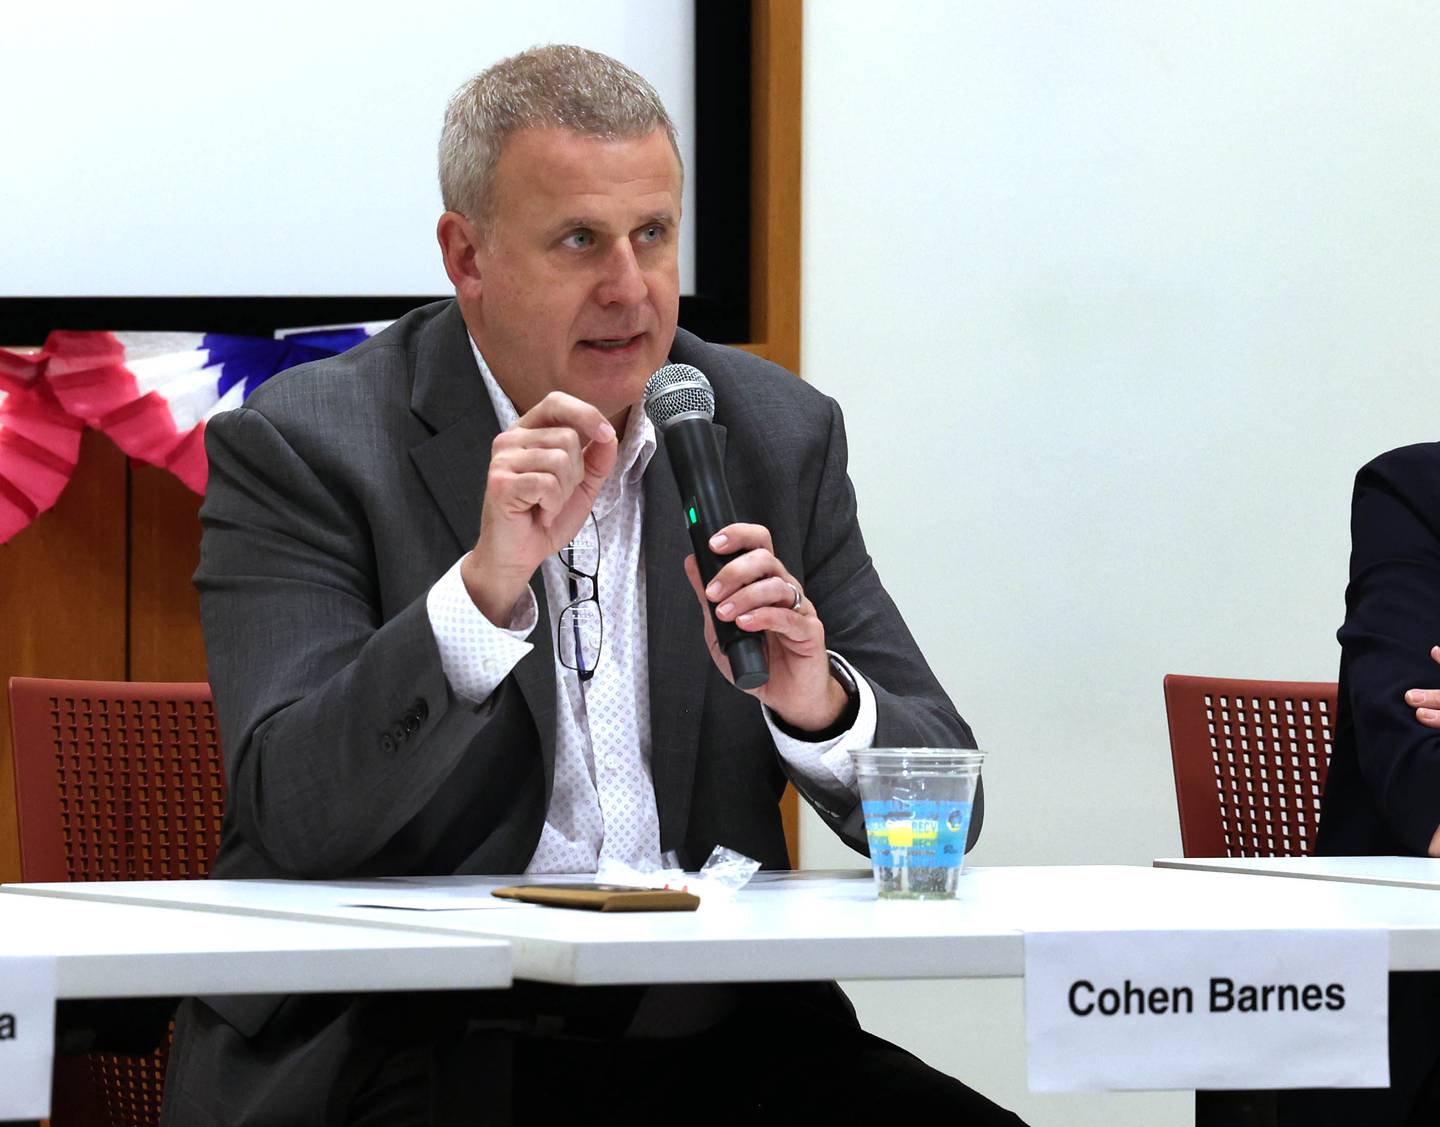 Democratic candidate Cohen Barnes, who is vying for the nomination for the 76th district seat in the Illinois House of Representatives, answers a question Saturday, Feb. 3, 2024, in a meet the candidates forum at the DeKalb Public Library. Democratic candidates Amy Murri Briel and Carolyn Zasada also spoke at the event organized by DeKalb Stands and co-sponsored by the DeKalb County Democrats.